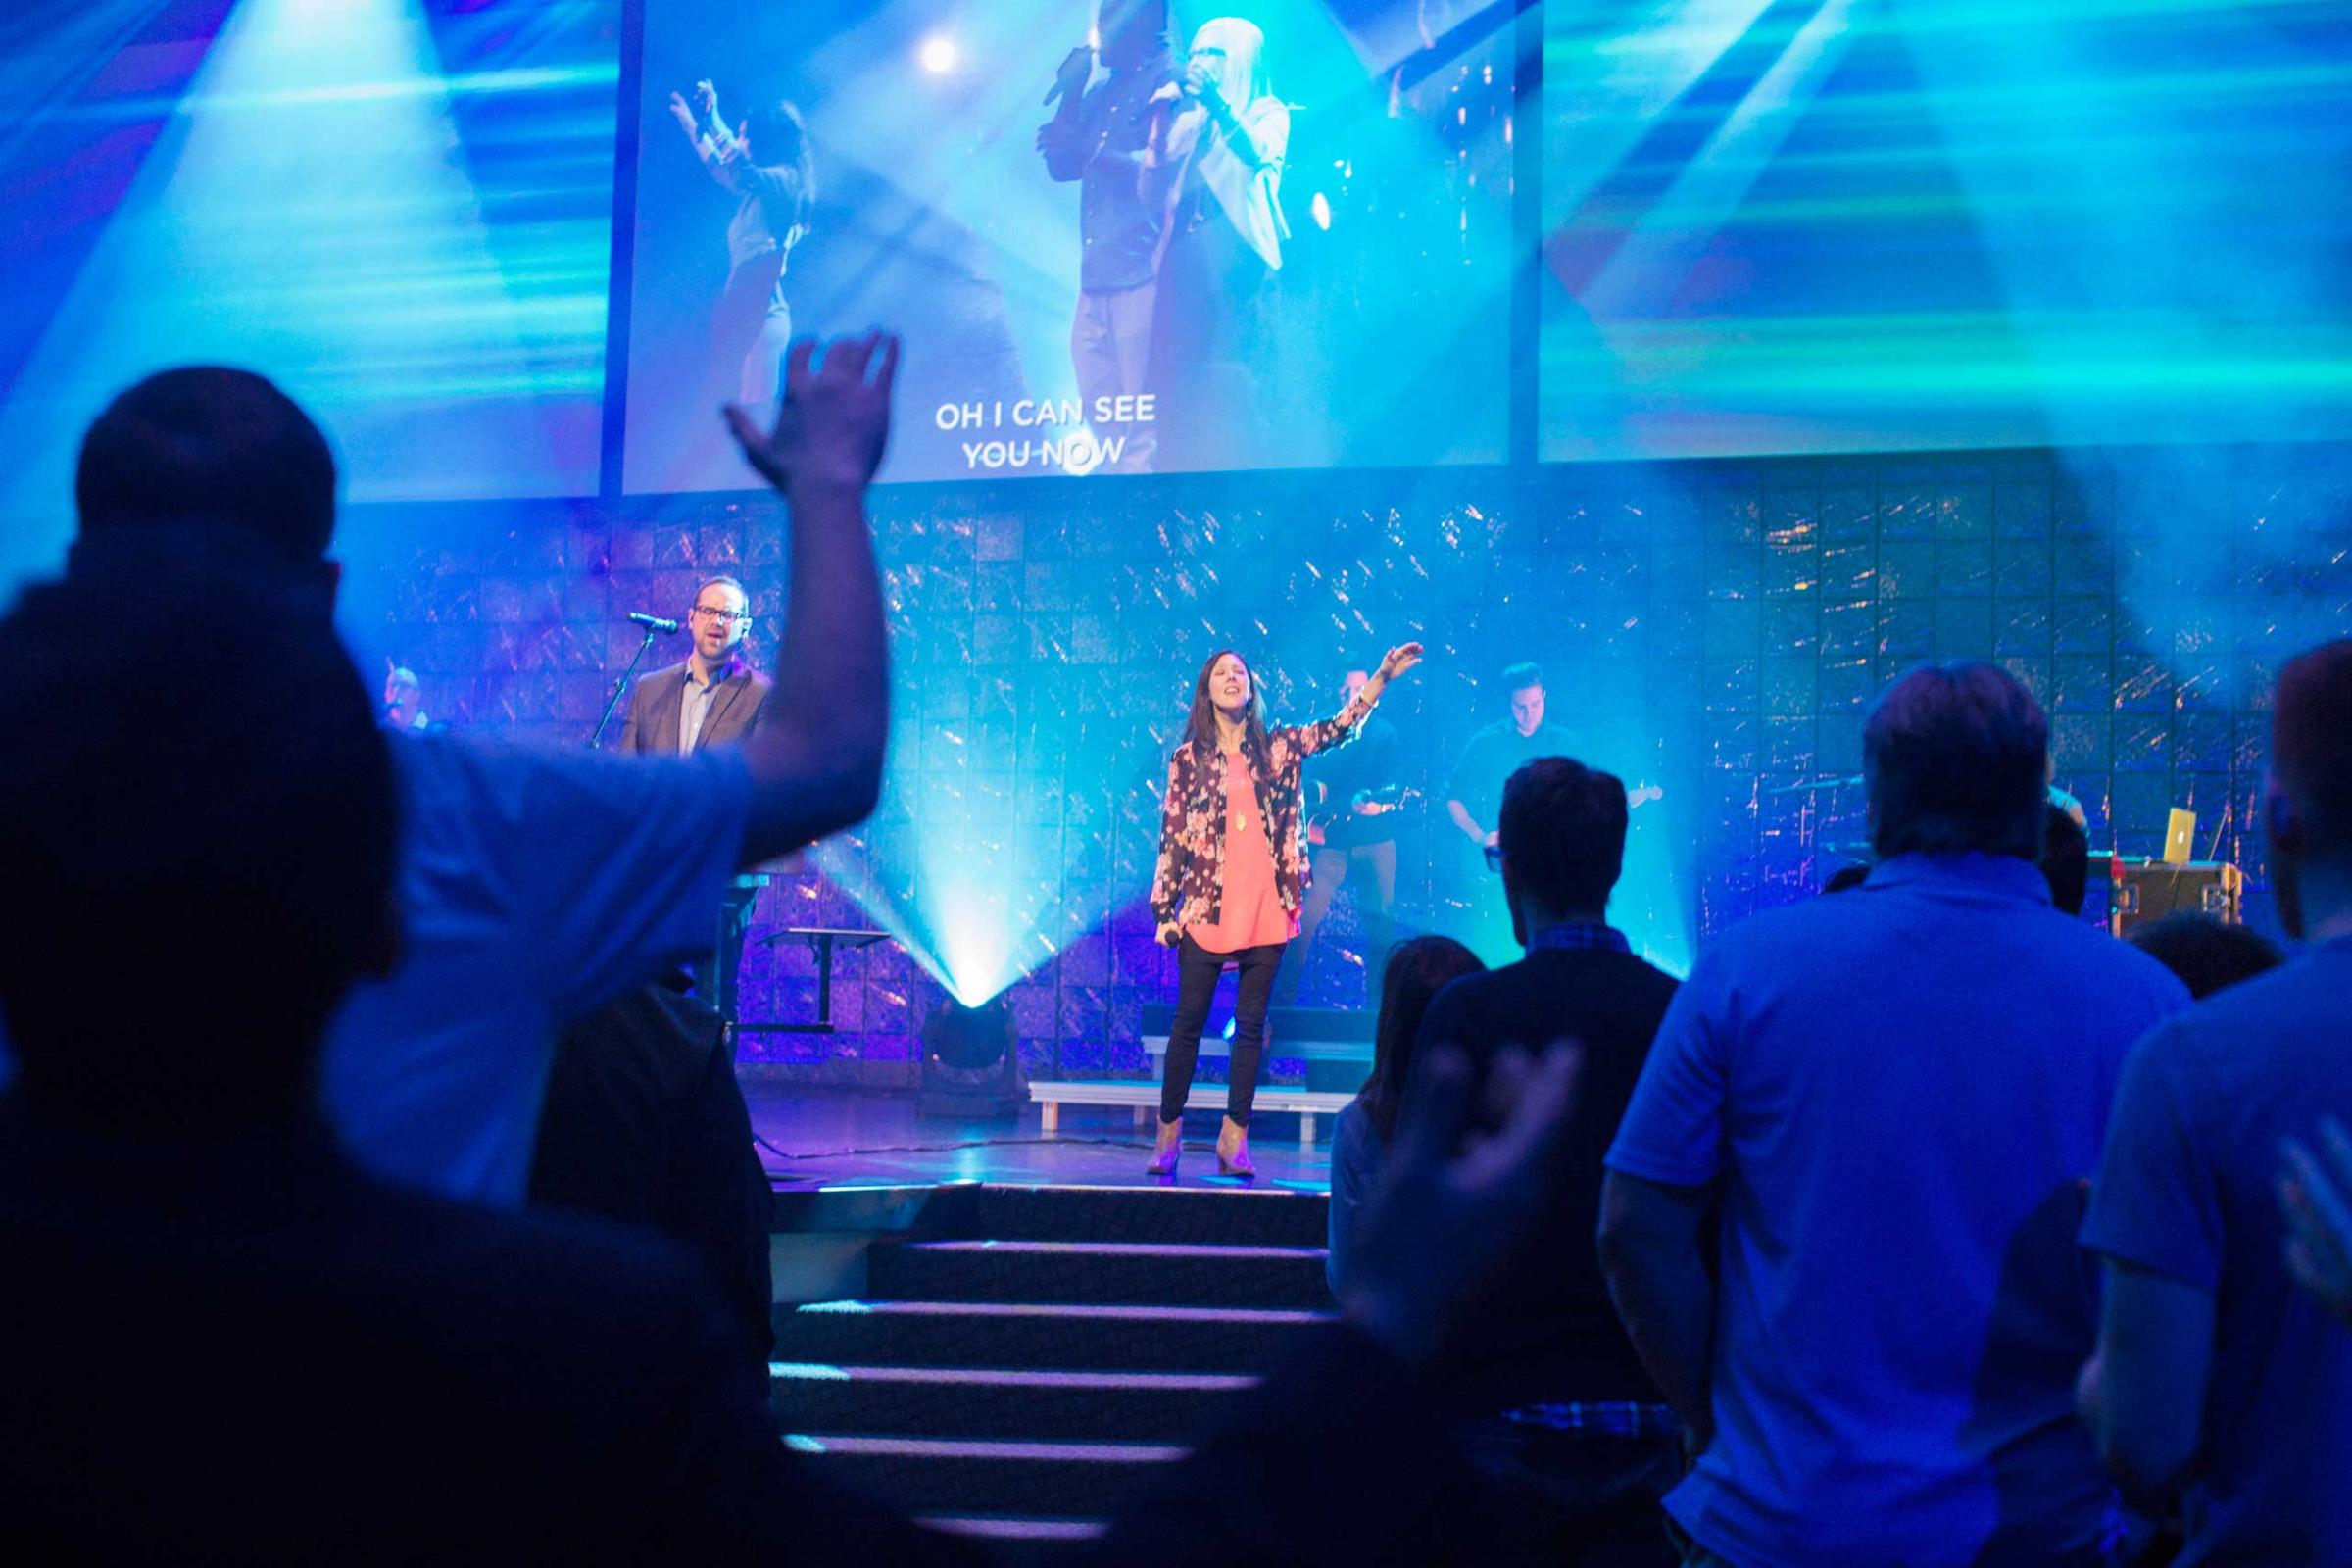 Worship time at Church of the Highlands, a rapidly growing mega-church, in Birmingham, Ala. on March 22, 2015.